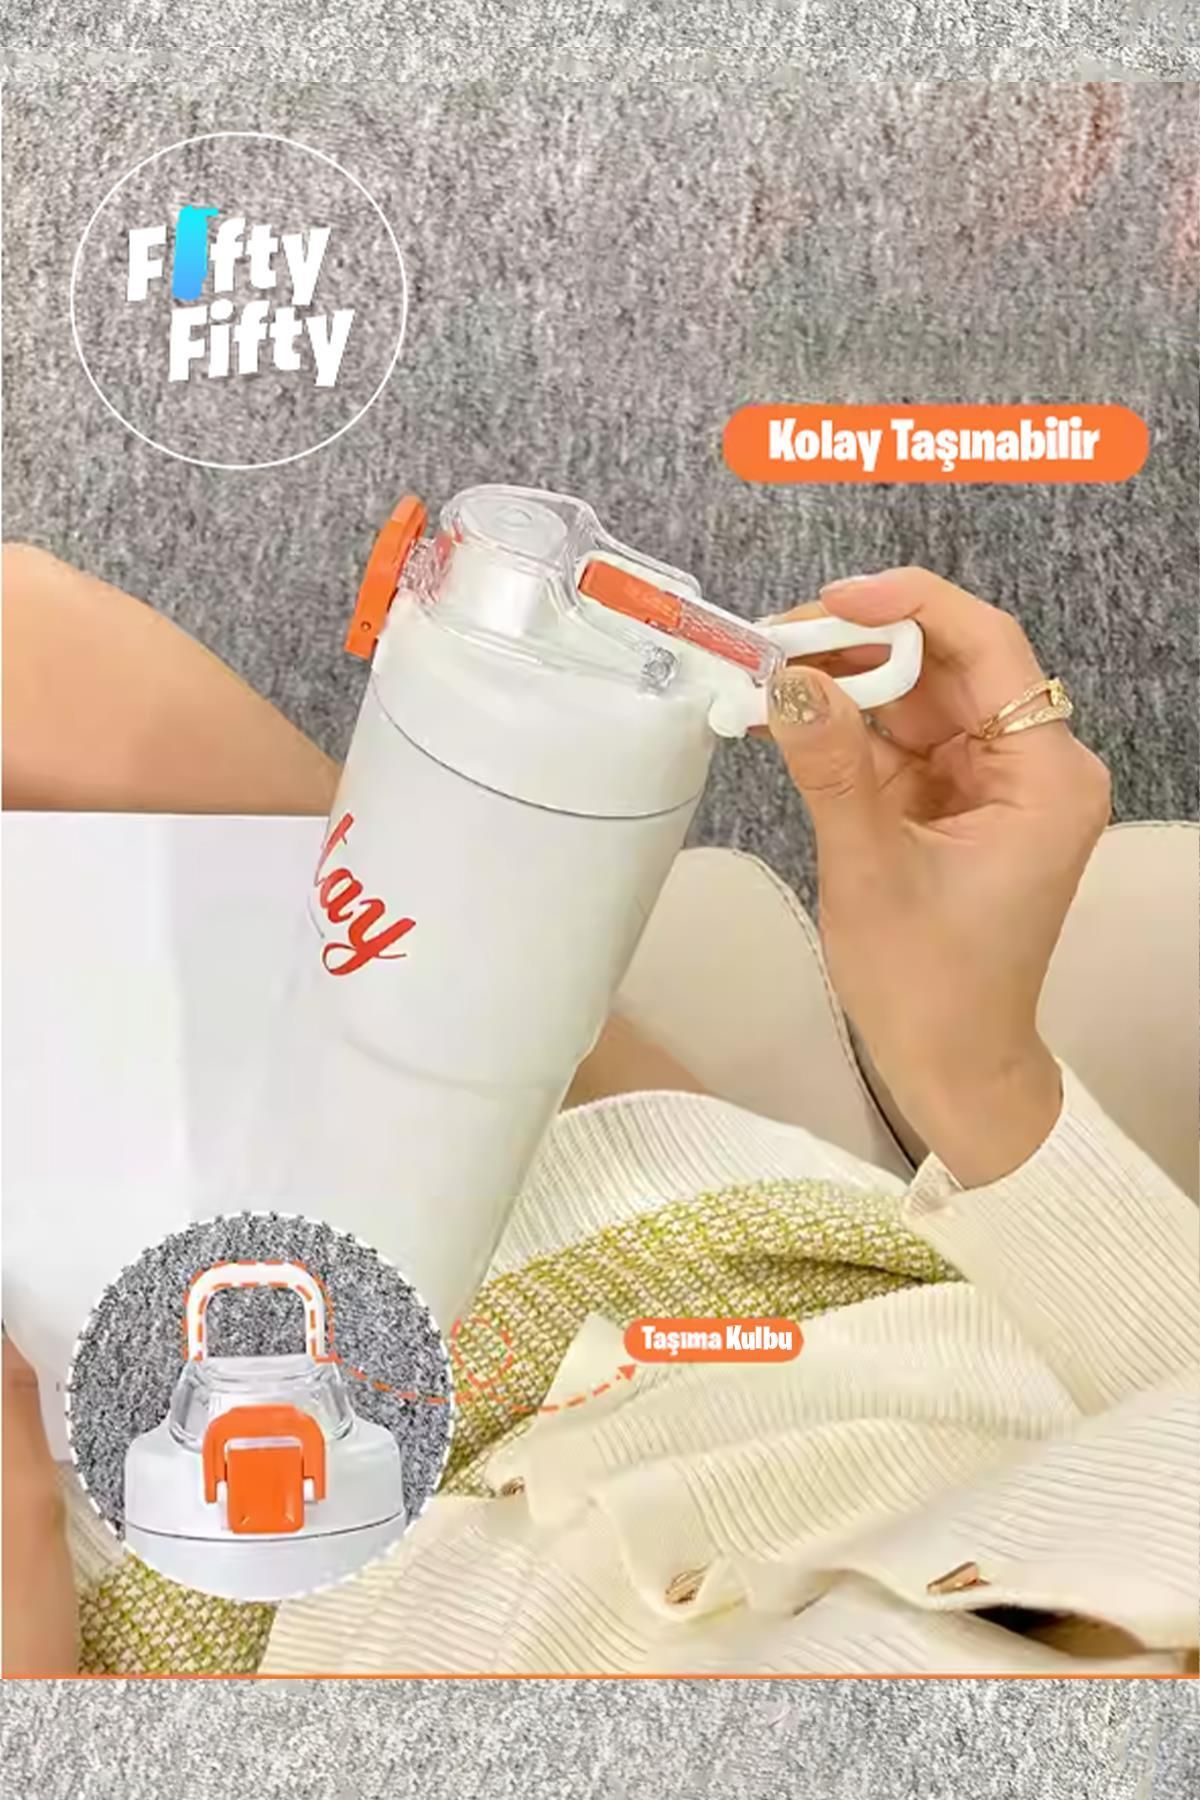 Shotay Comfortable Drinking 600ml Strawless Handled Water Bottle with  Lockable Lid and Measuring Scale - Trendyol